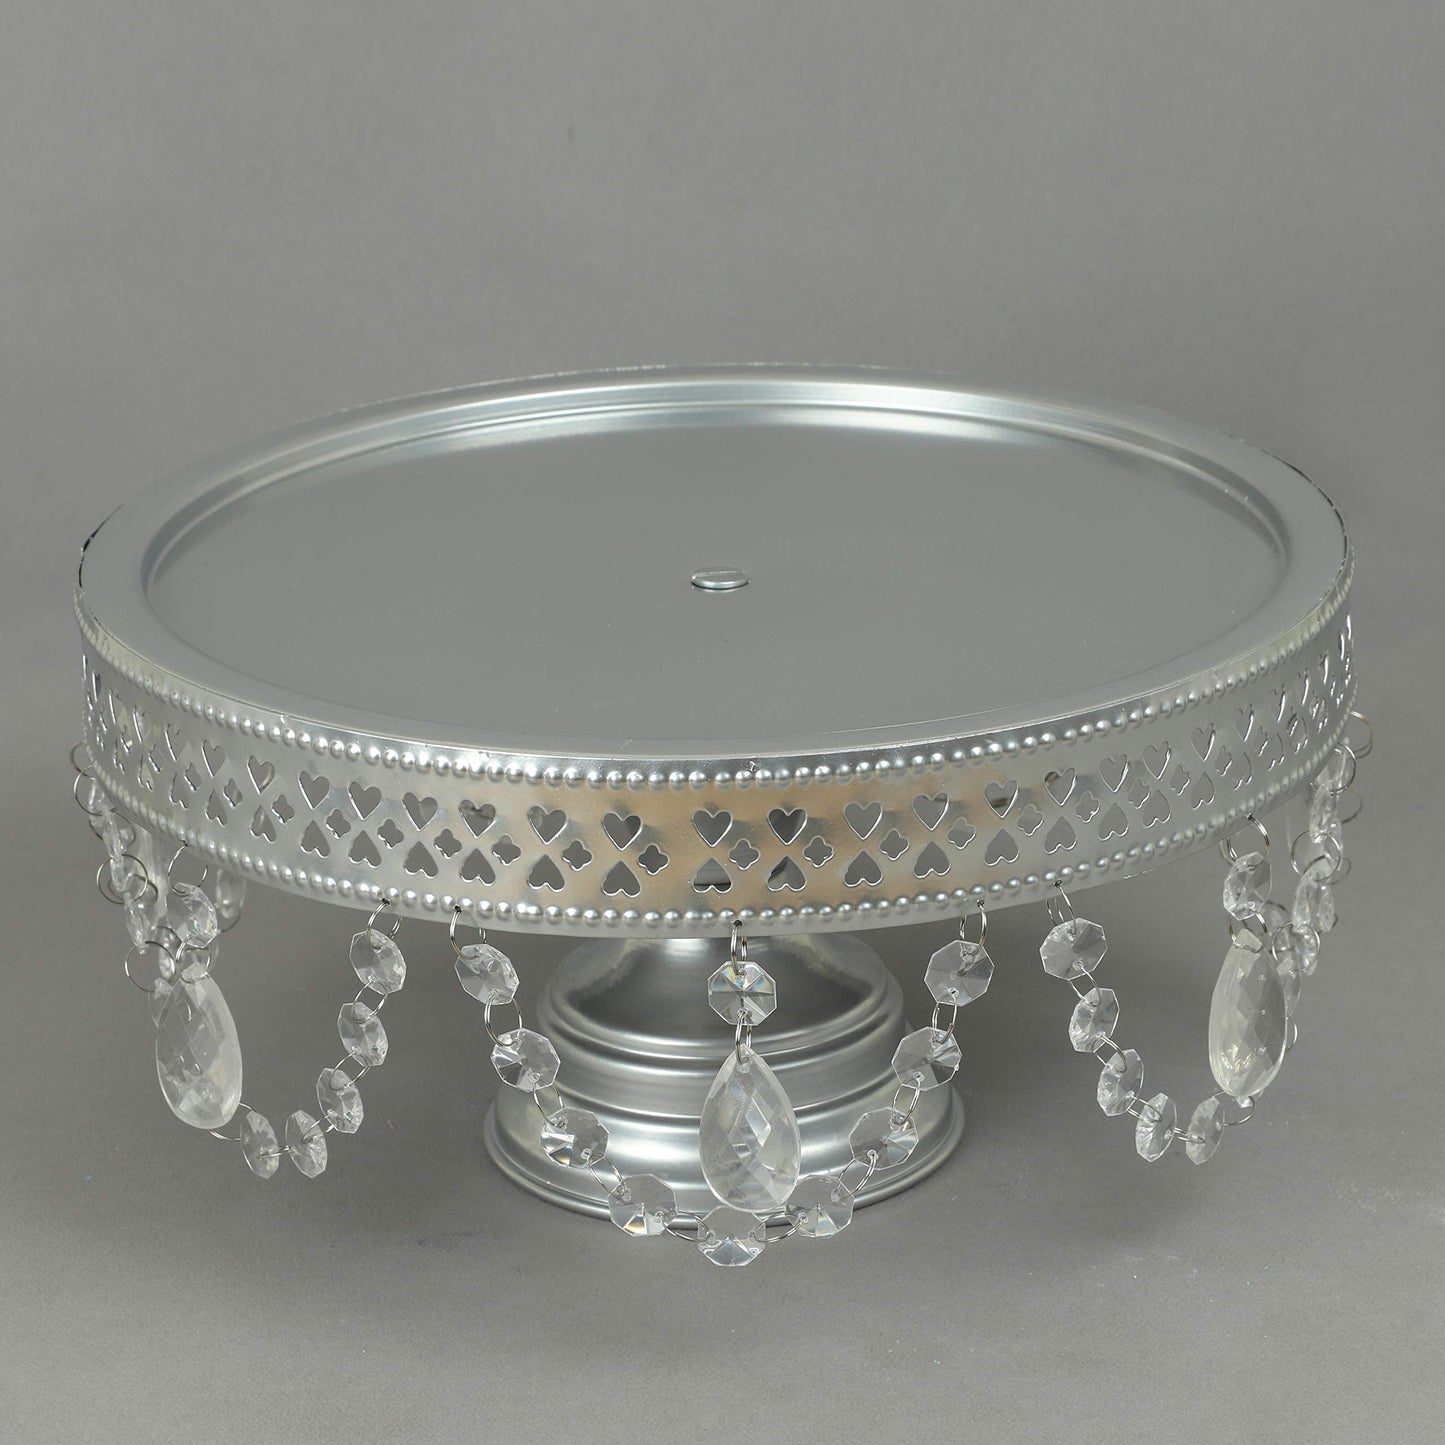 GiftBay Creations Cake Stand Pedestal 11" Diameter (Top), Strong Metal with Clear Hanging Crystals (Silver)